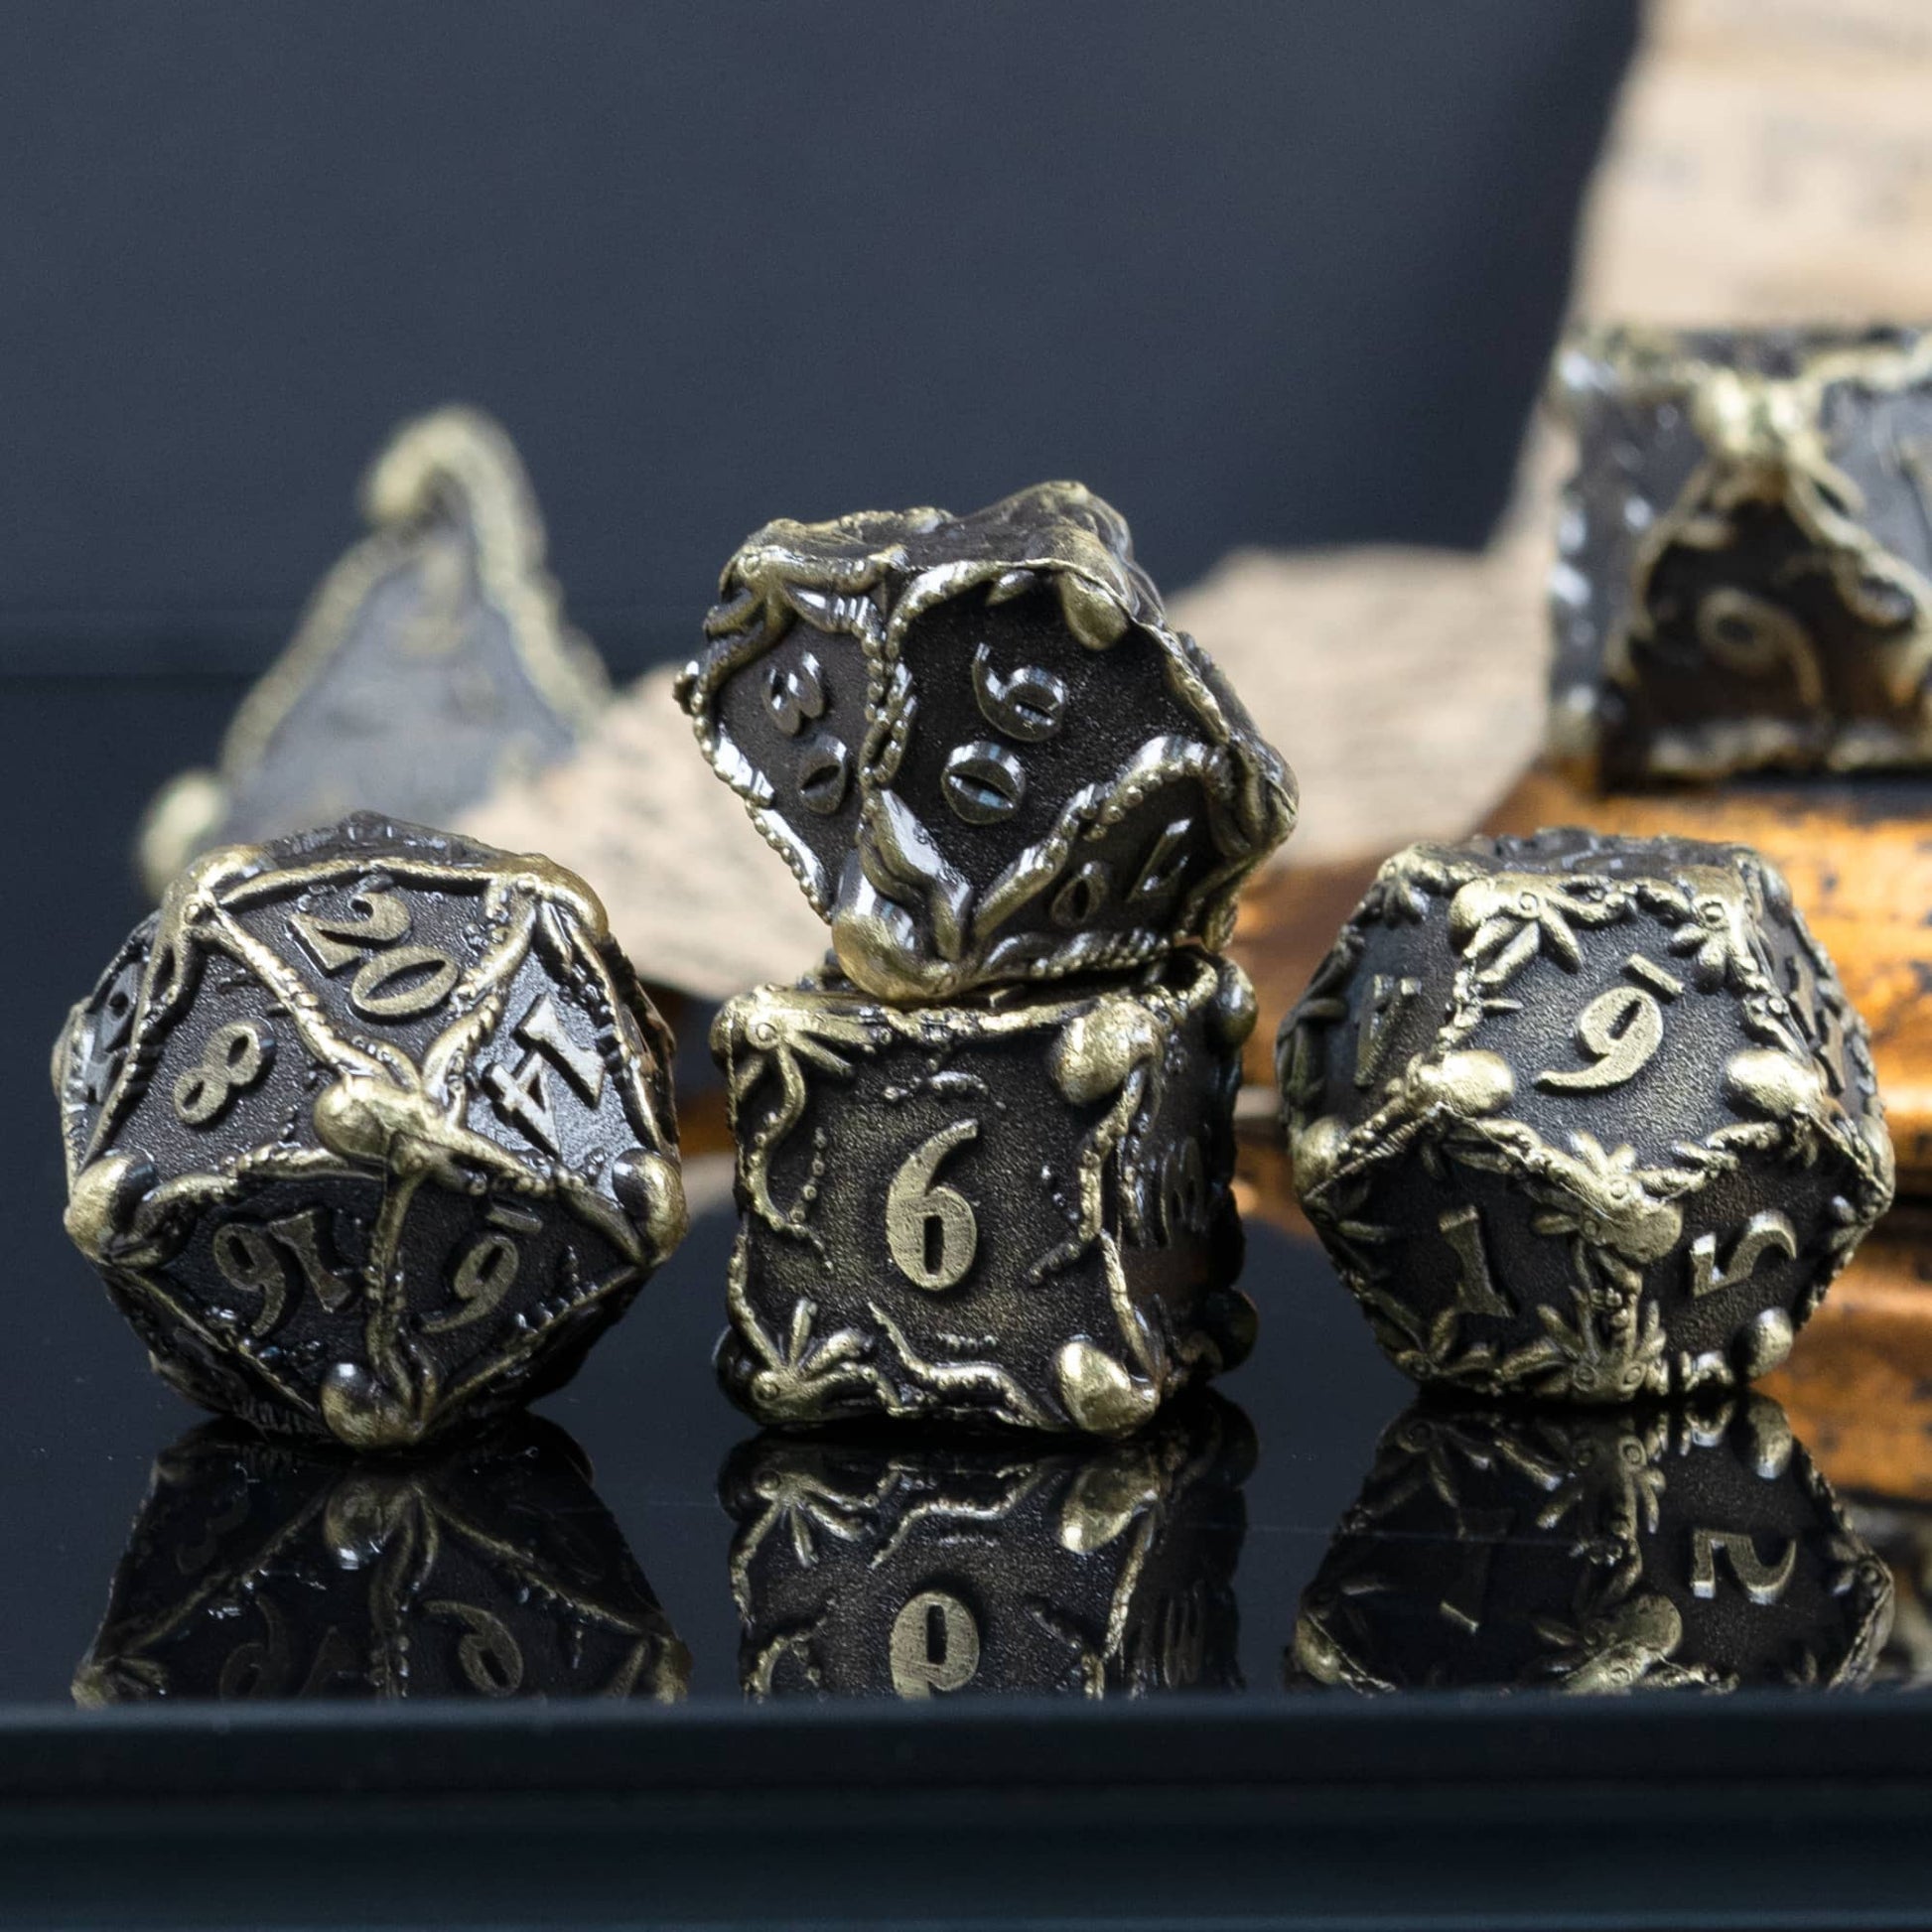 Light trimmed metal octopus dice, d20, percentage dice, d6 and d12 highlighted in front